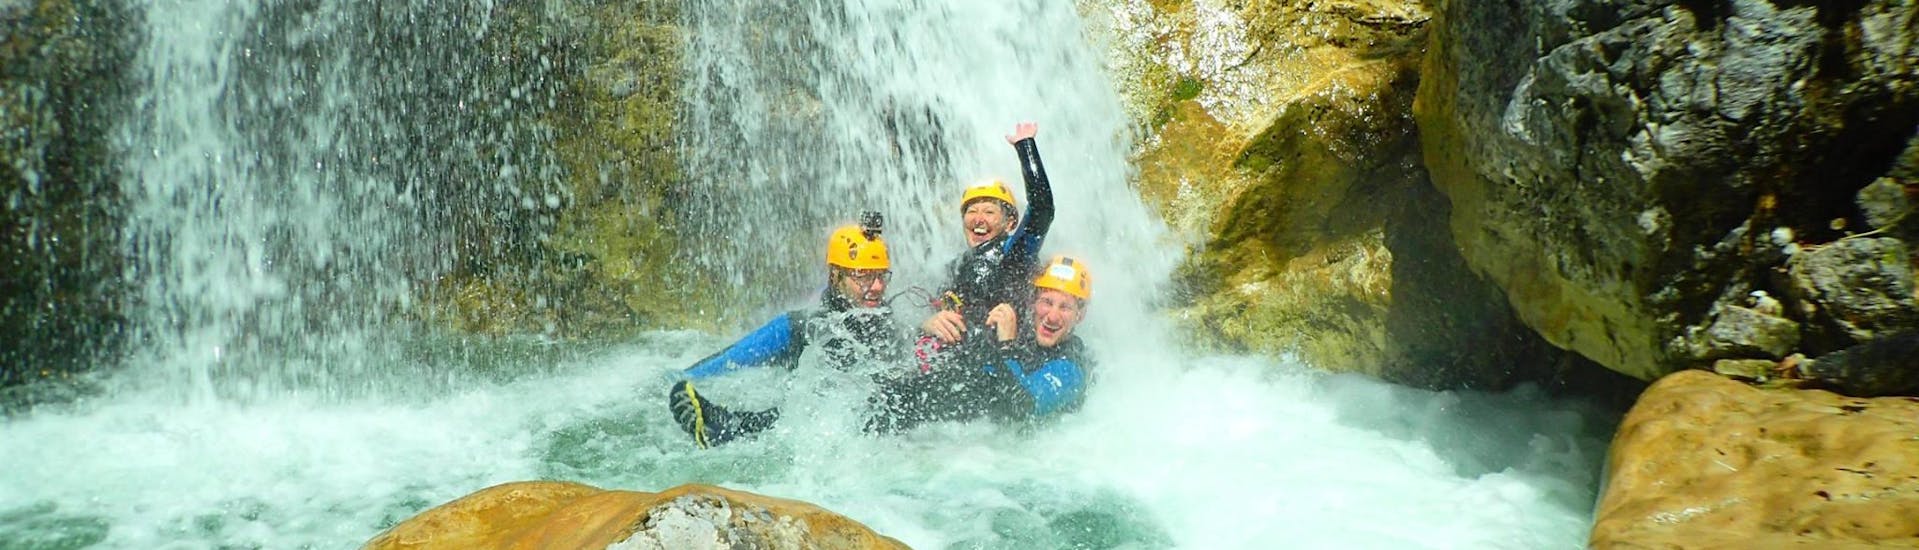 Canyoning expert à Golling - Altersbach.